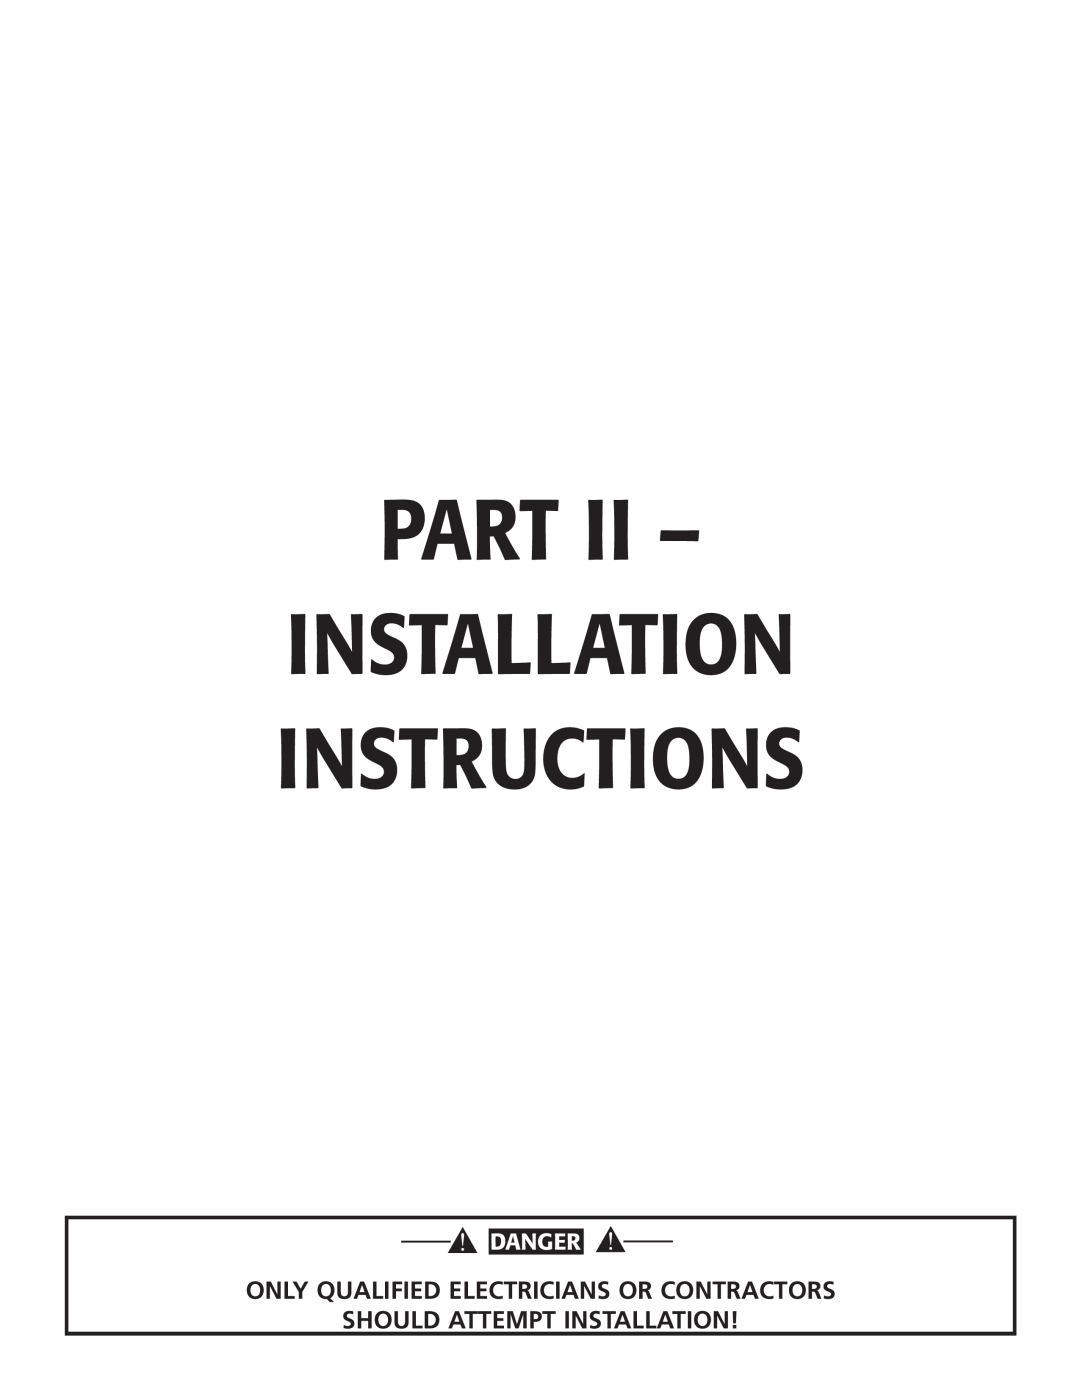 Guardian Technologies 004700-0 Part, Installation Instructions, Only Qualified Electricians Or Contractors, Danger 